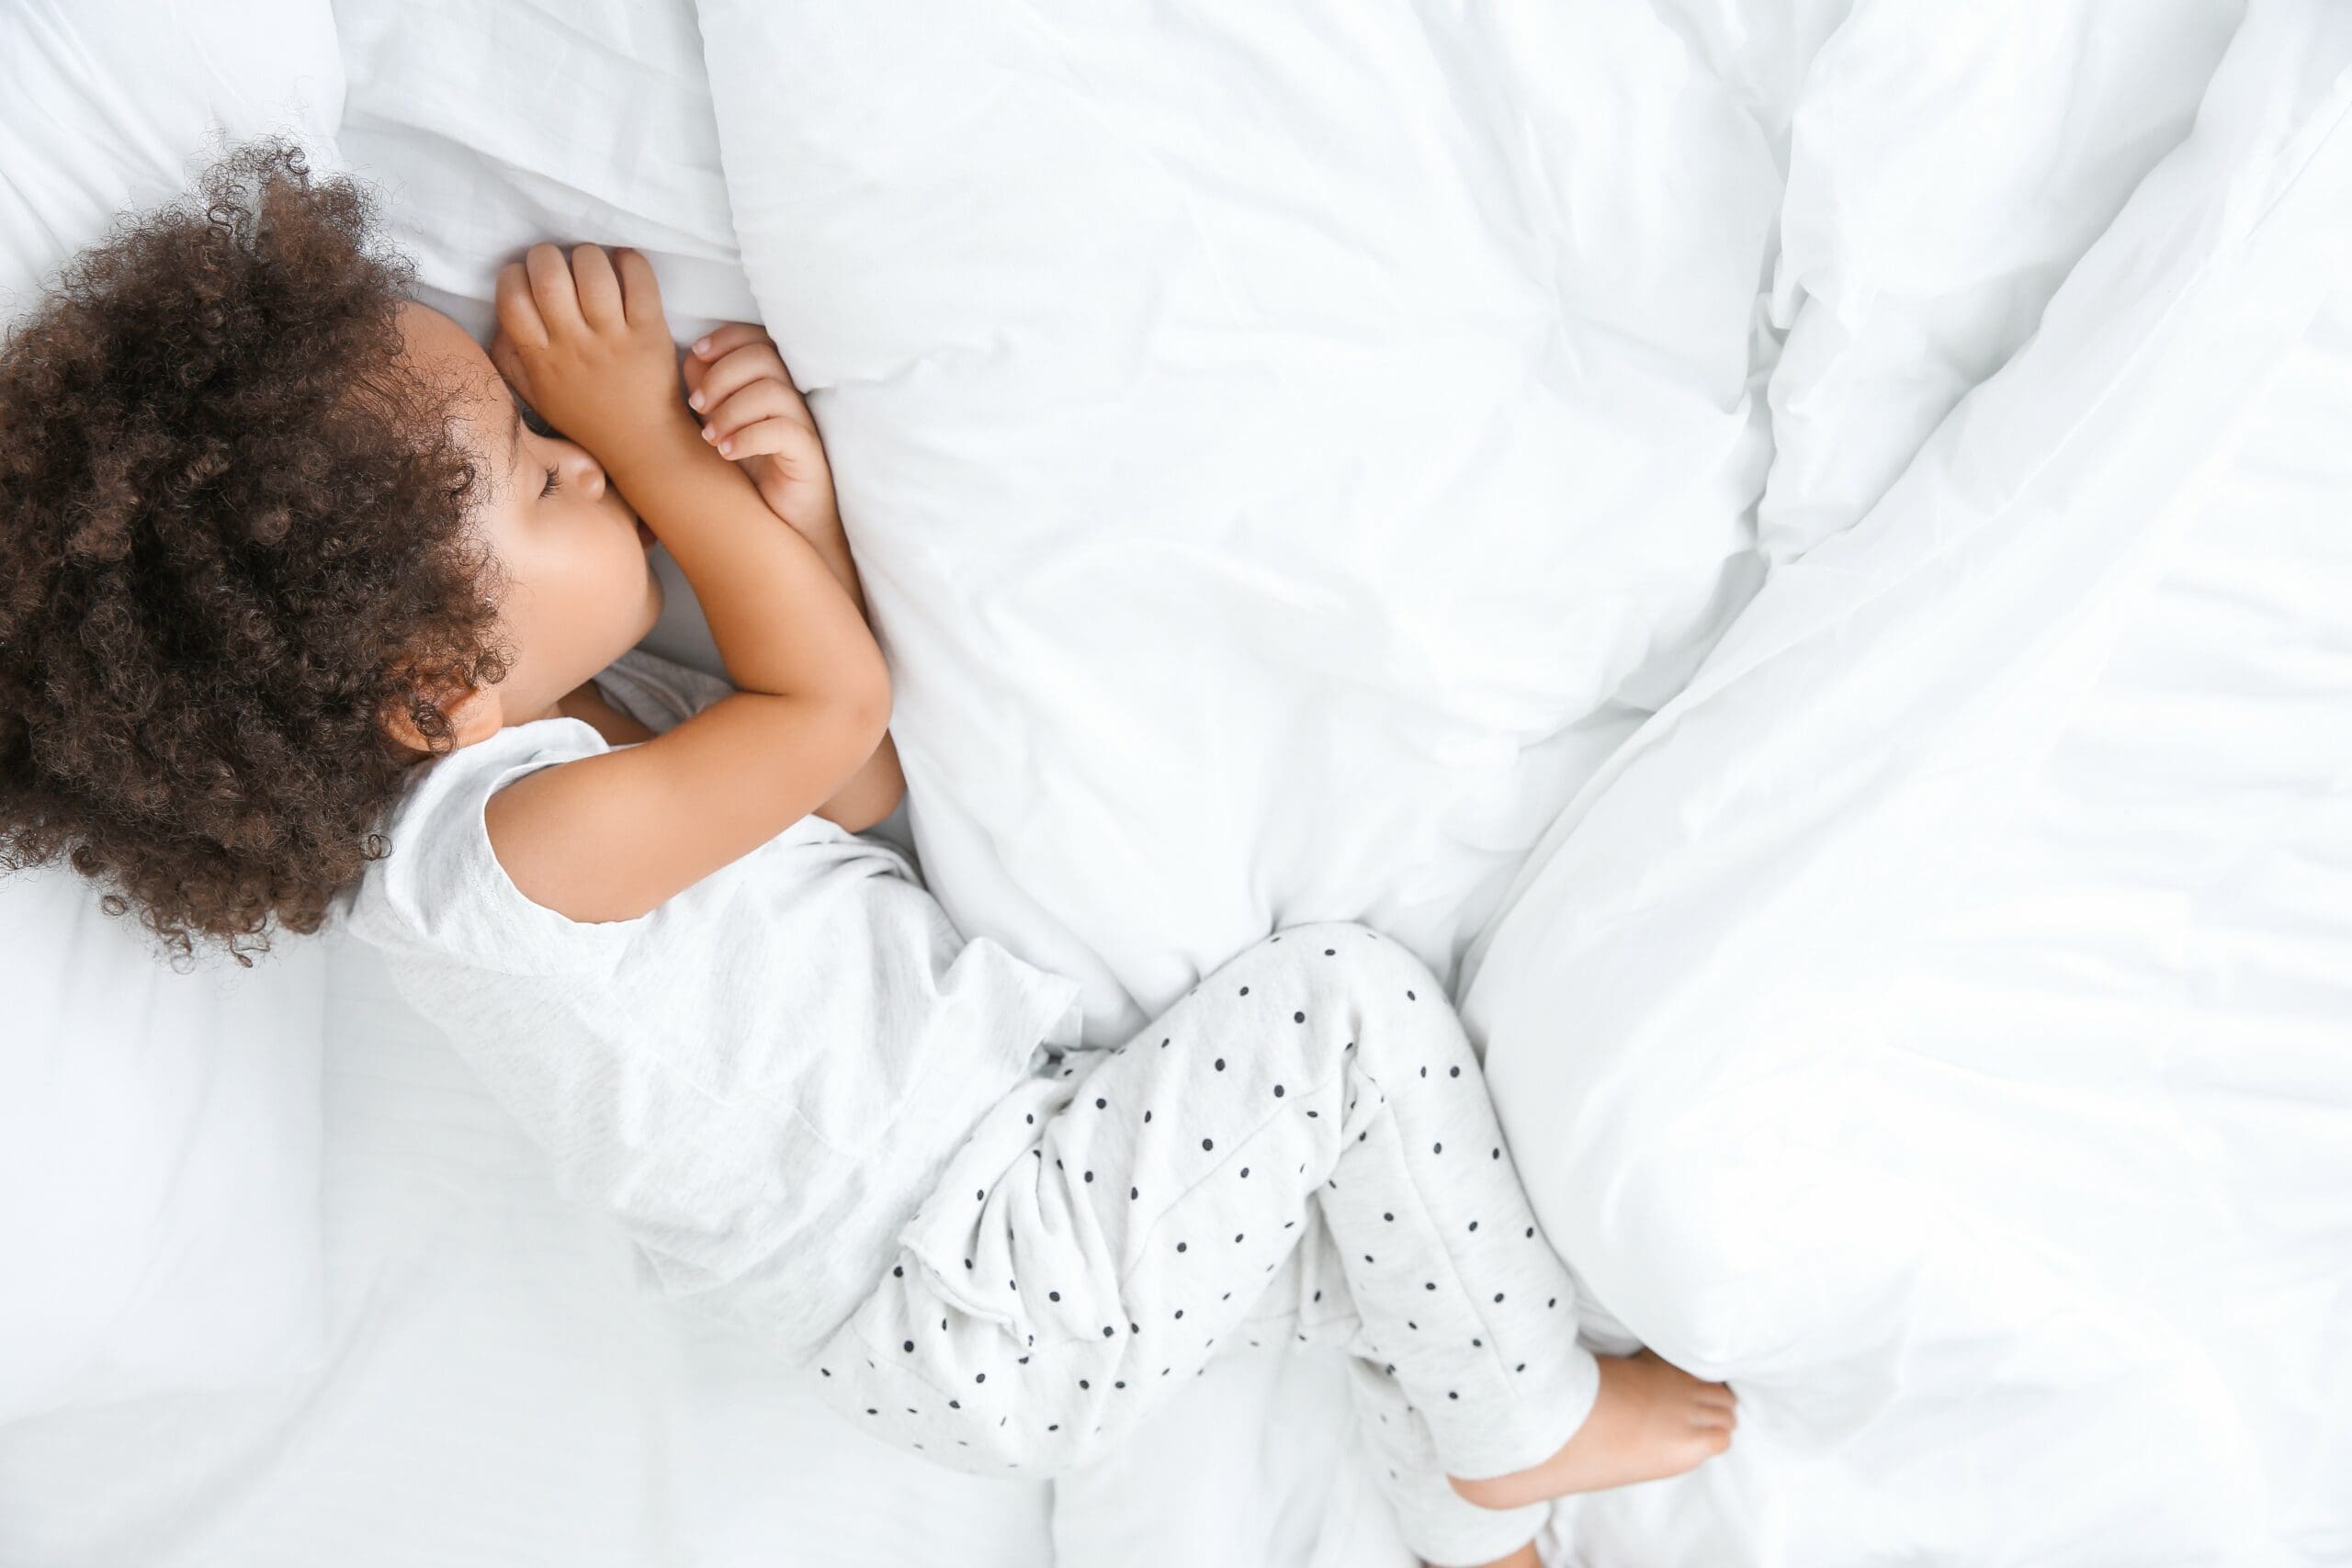 Can I use a magic wand to make my toddler sleep through the night